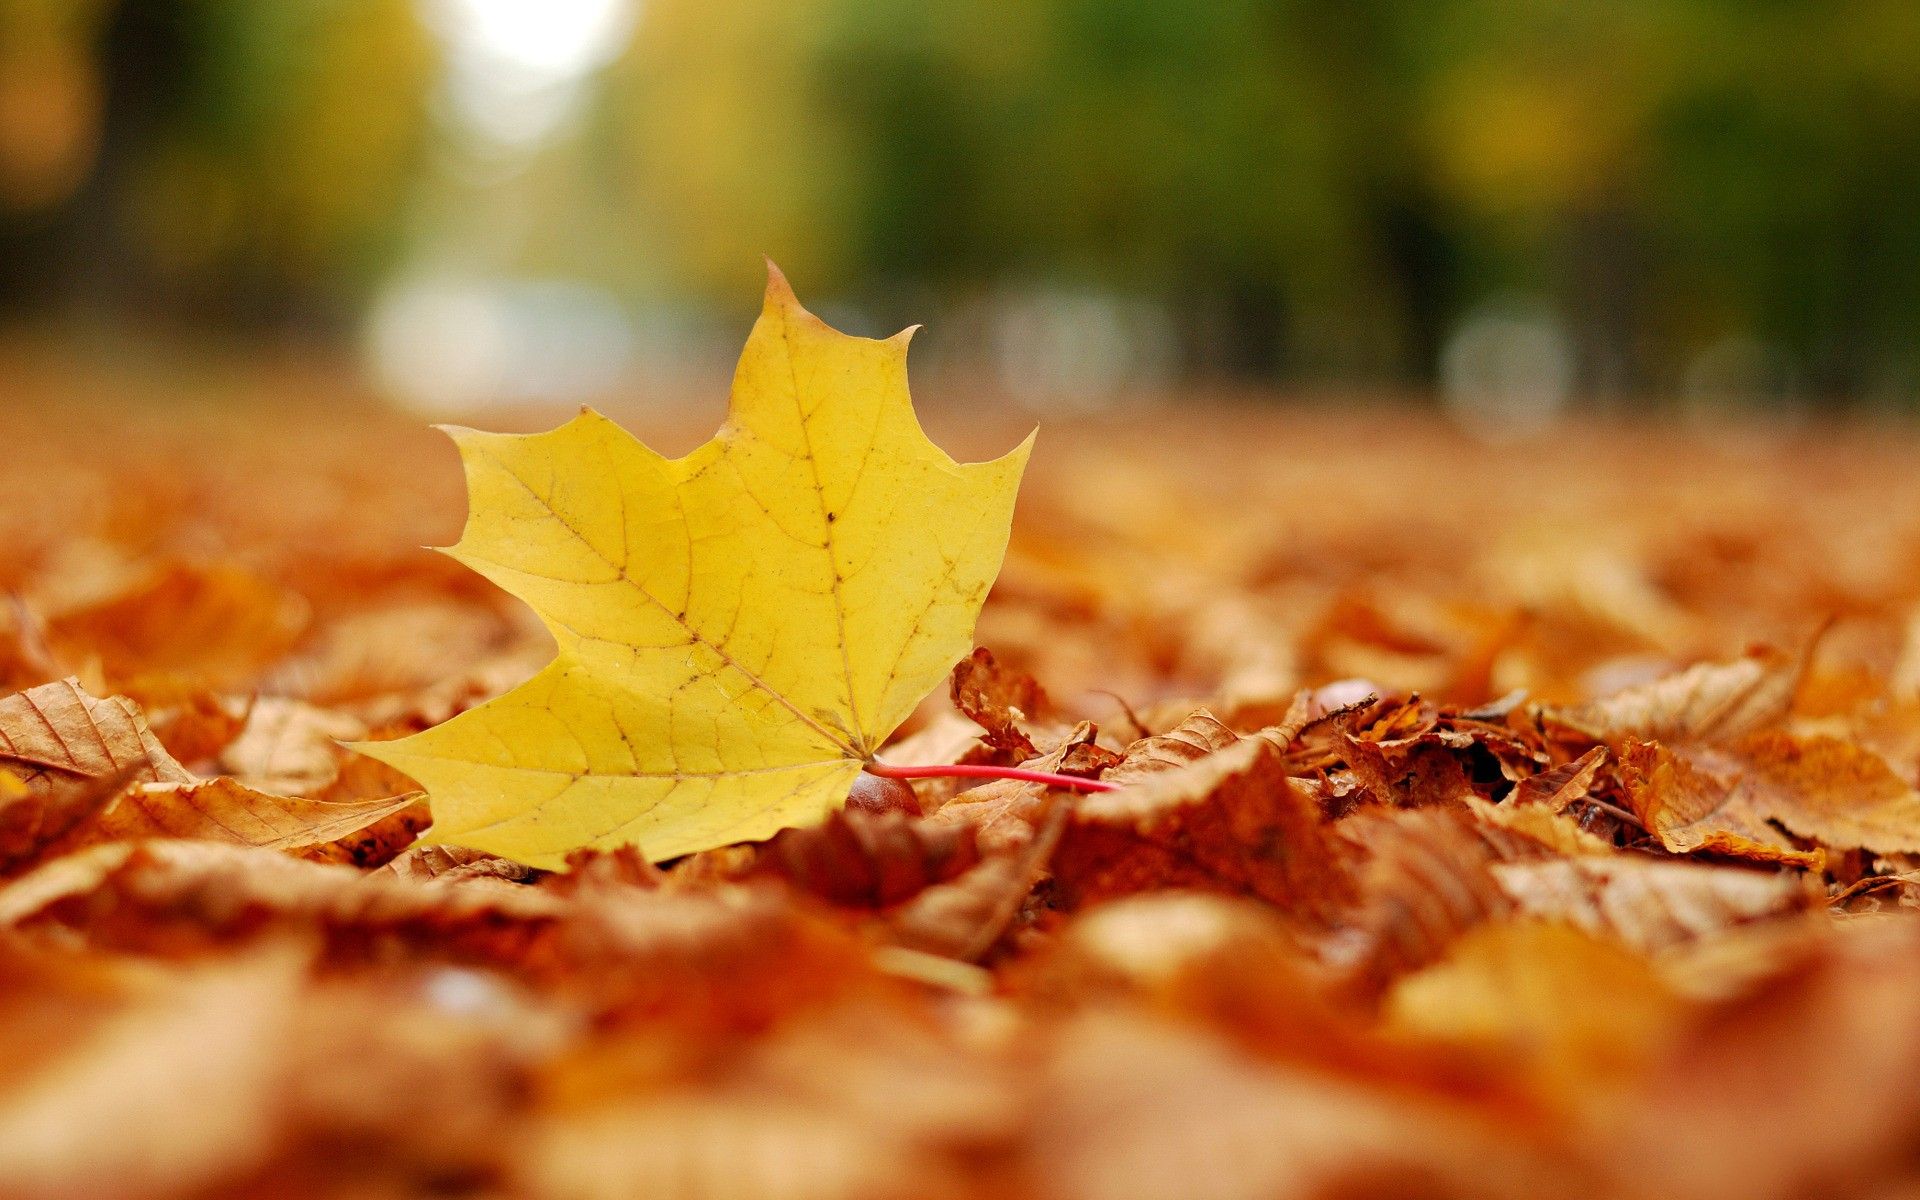 awesome Fallen Leaves Image For Free | AmazingPict.com - Wallpapers ...